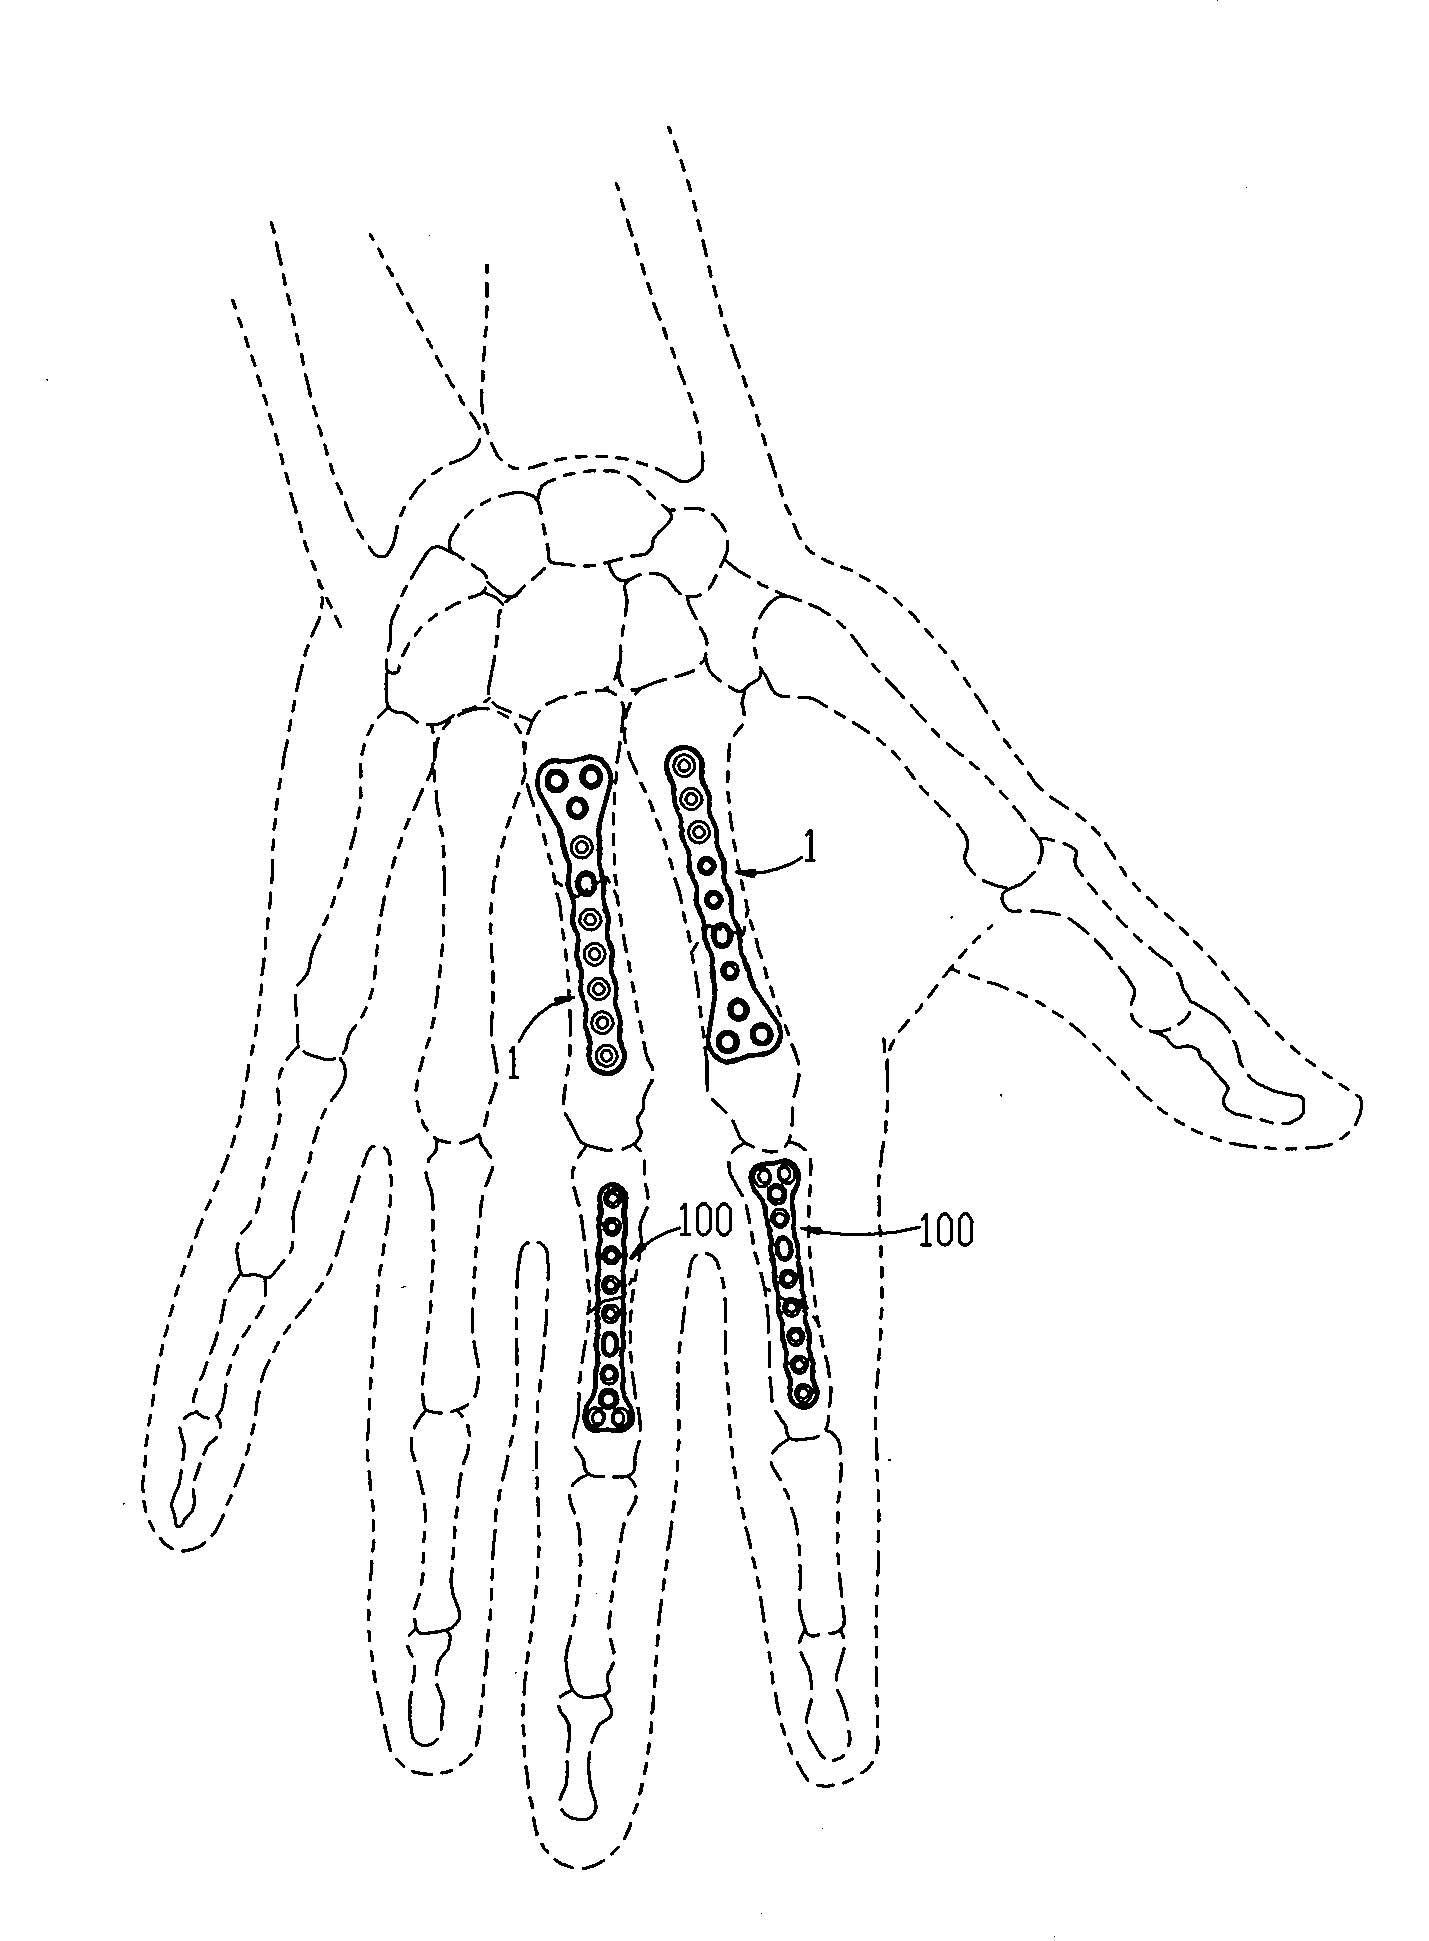 Subcondylar fracture fixation plate system for tubular bones of the hand